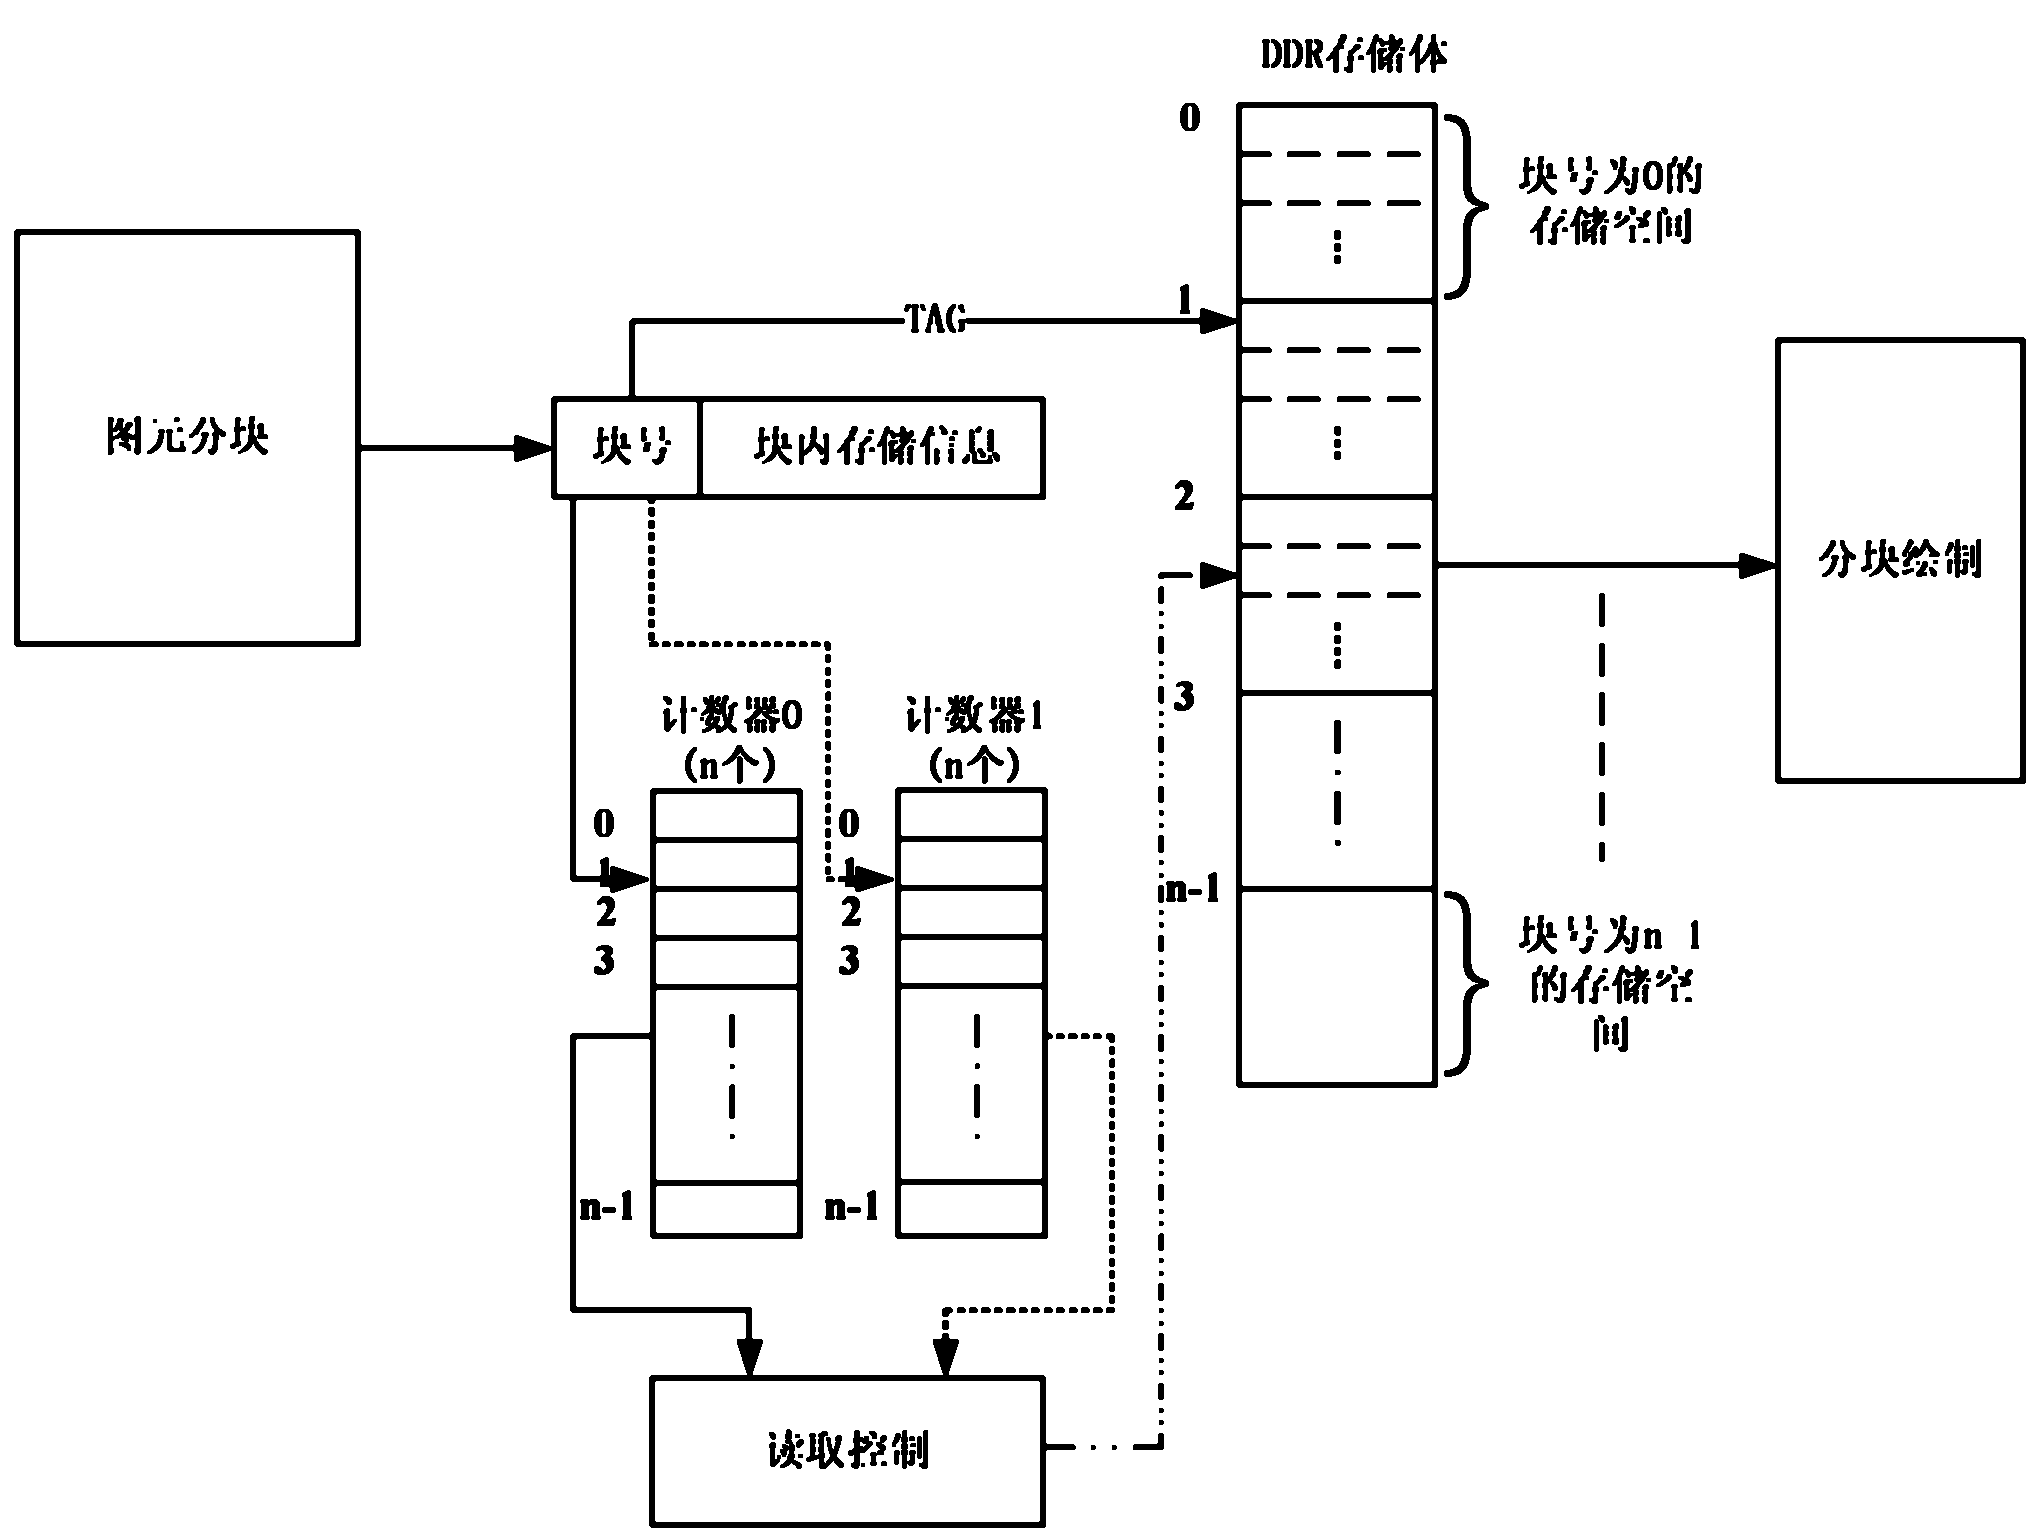 Realization of tile cache strategy in graphics processing unit (GPU) based on tile based rendering